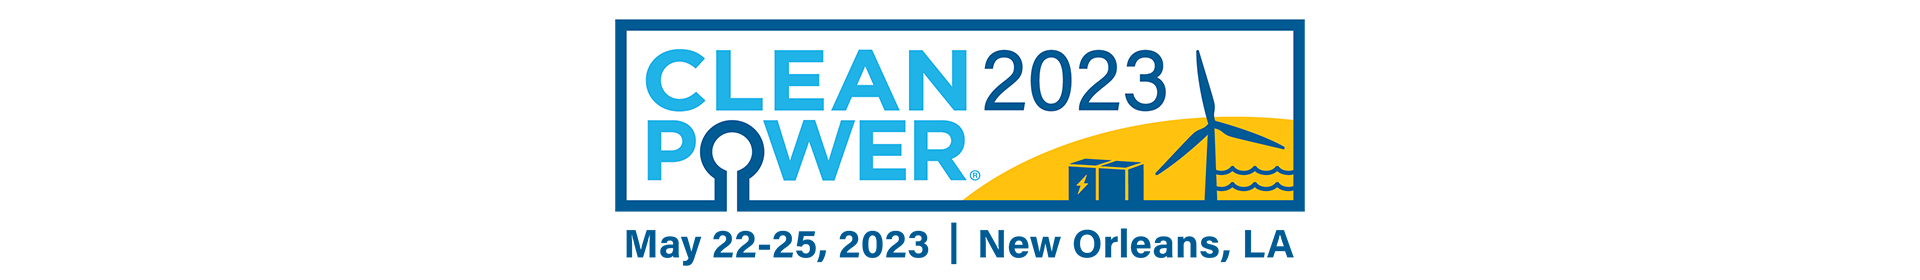 CLEANPOWER 2023 Conference & Exhibition Event Banner